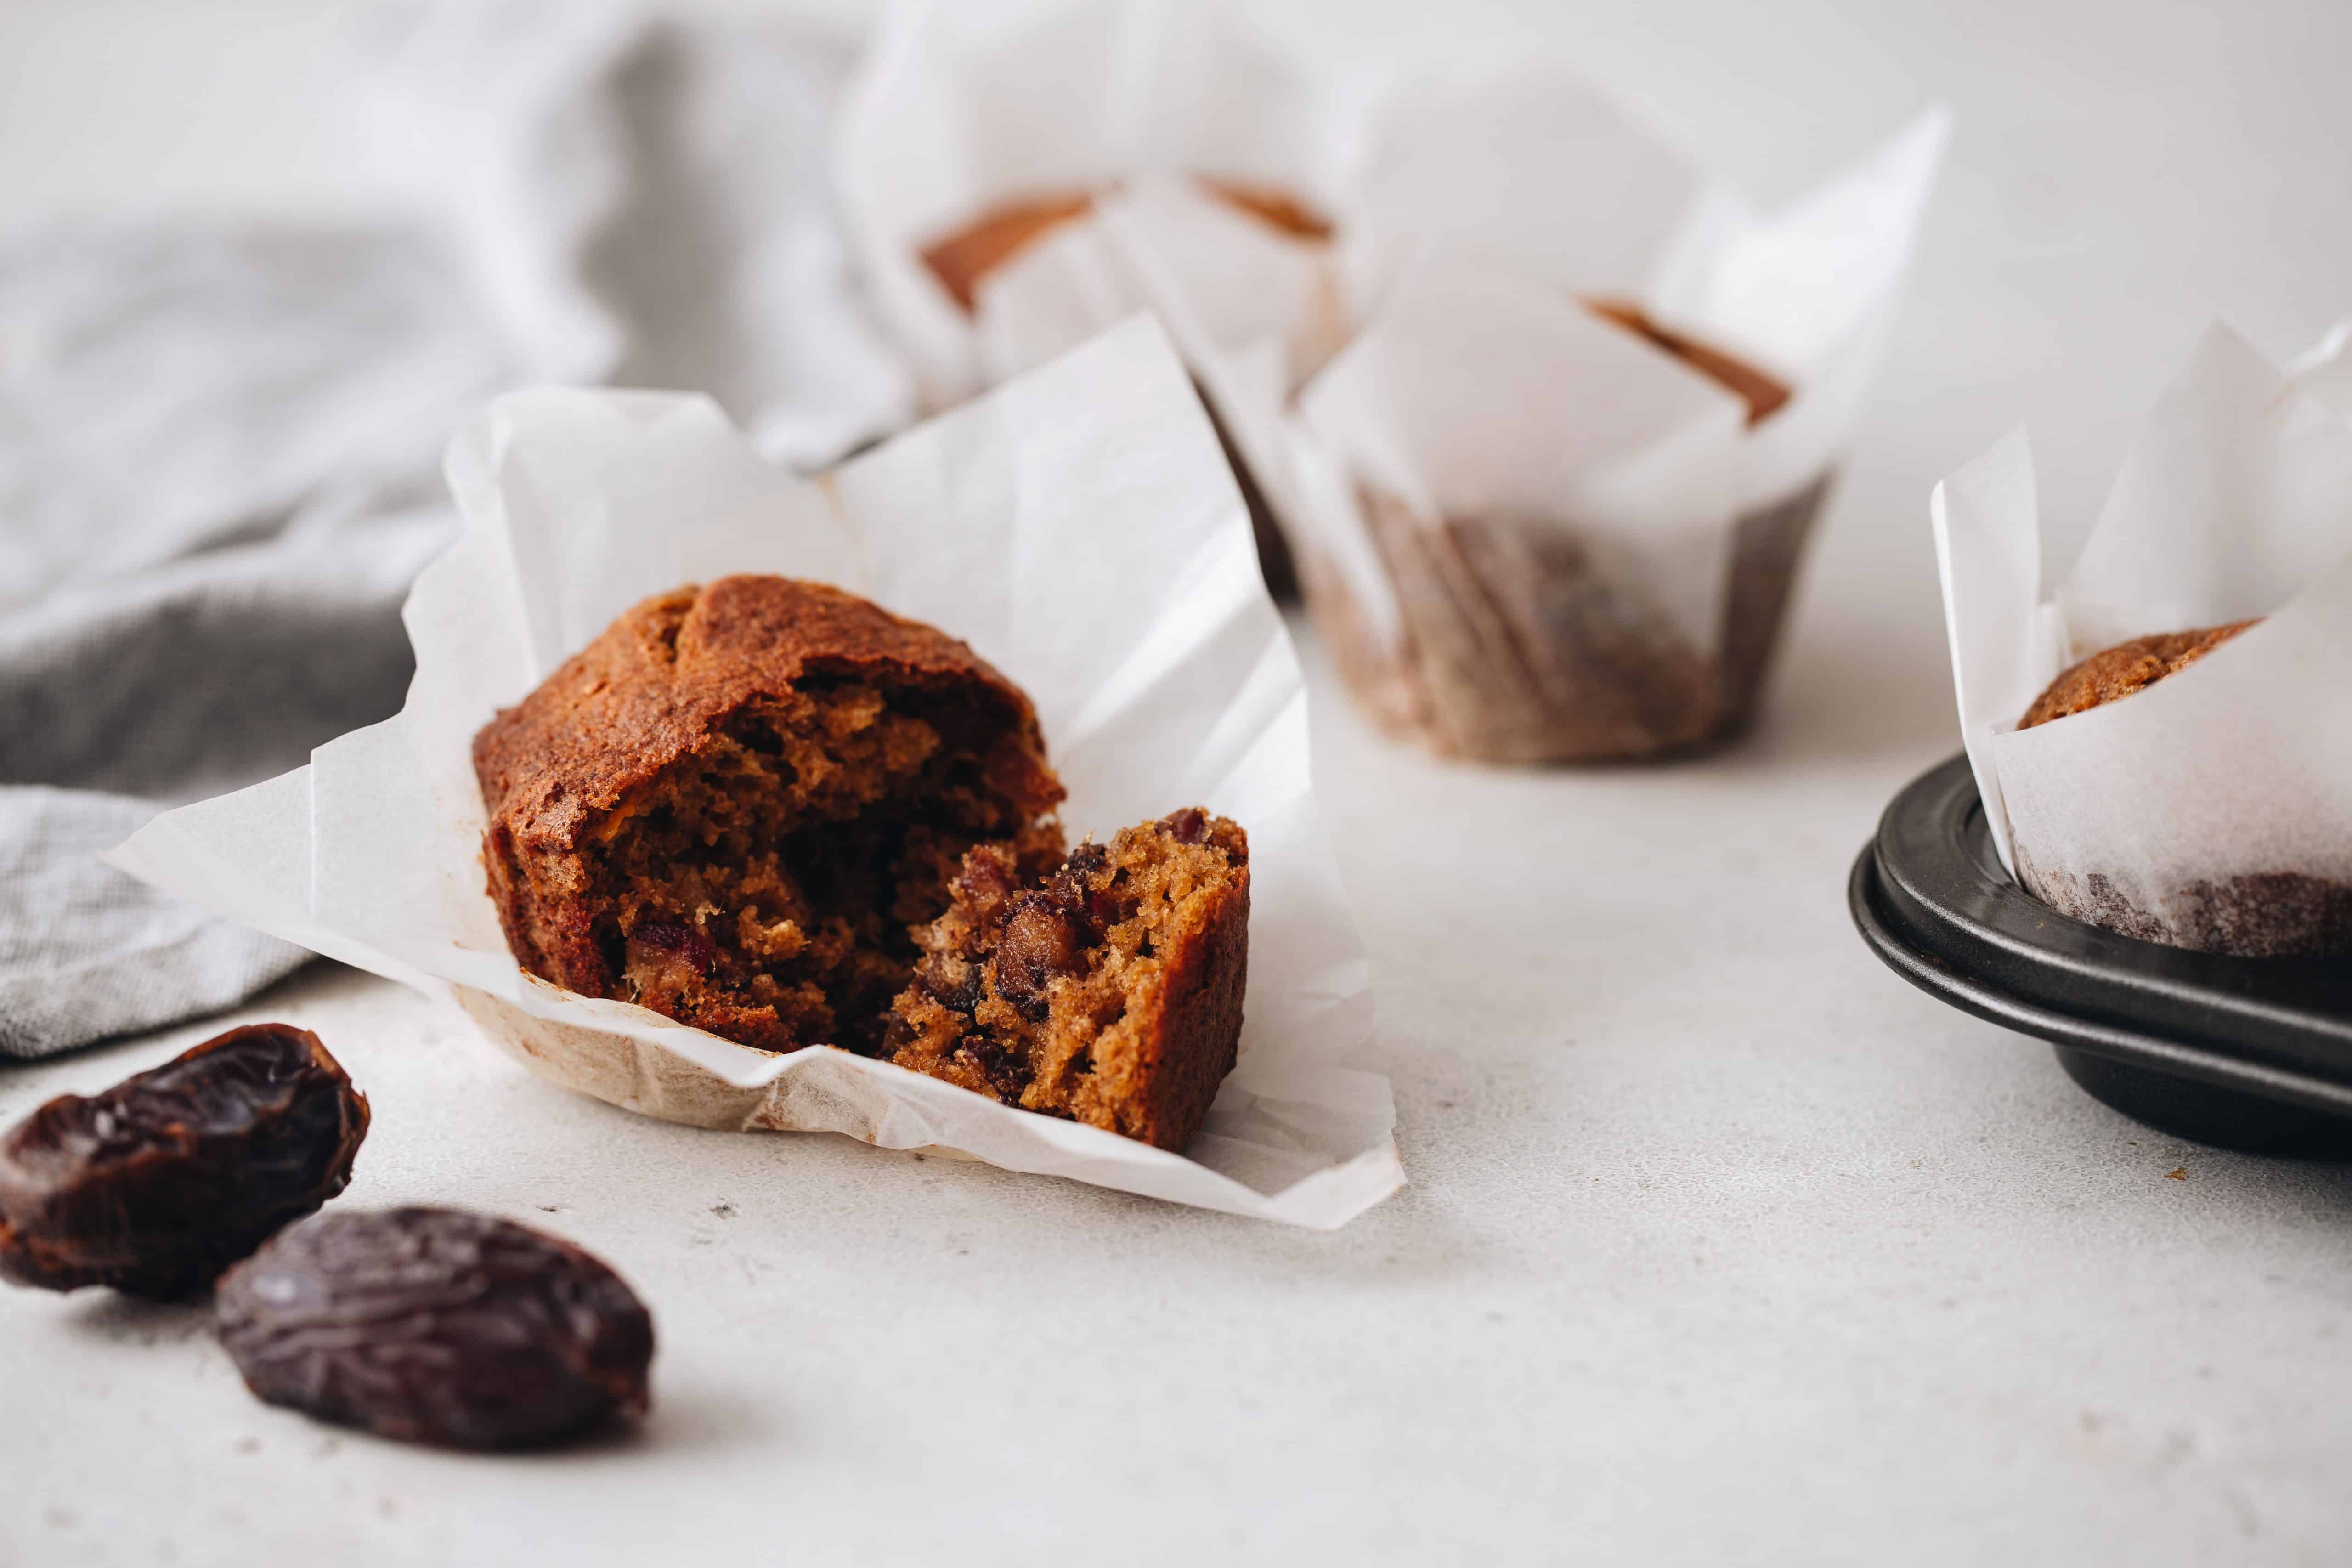 Pumpkin and date muffins, the perfect breakfast on the go, afternoon pick me up or perfect picnic food treat.